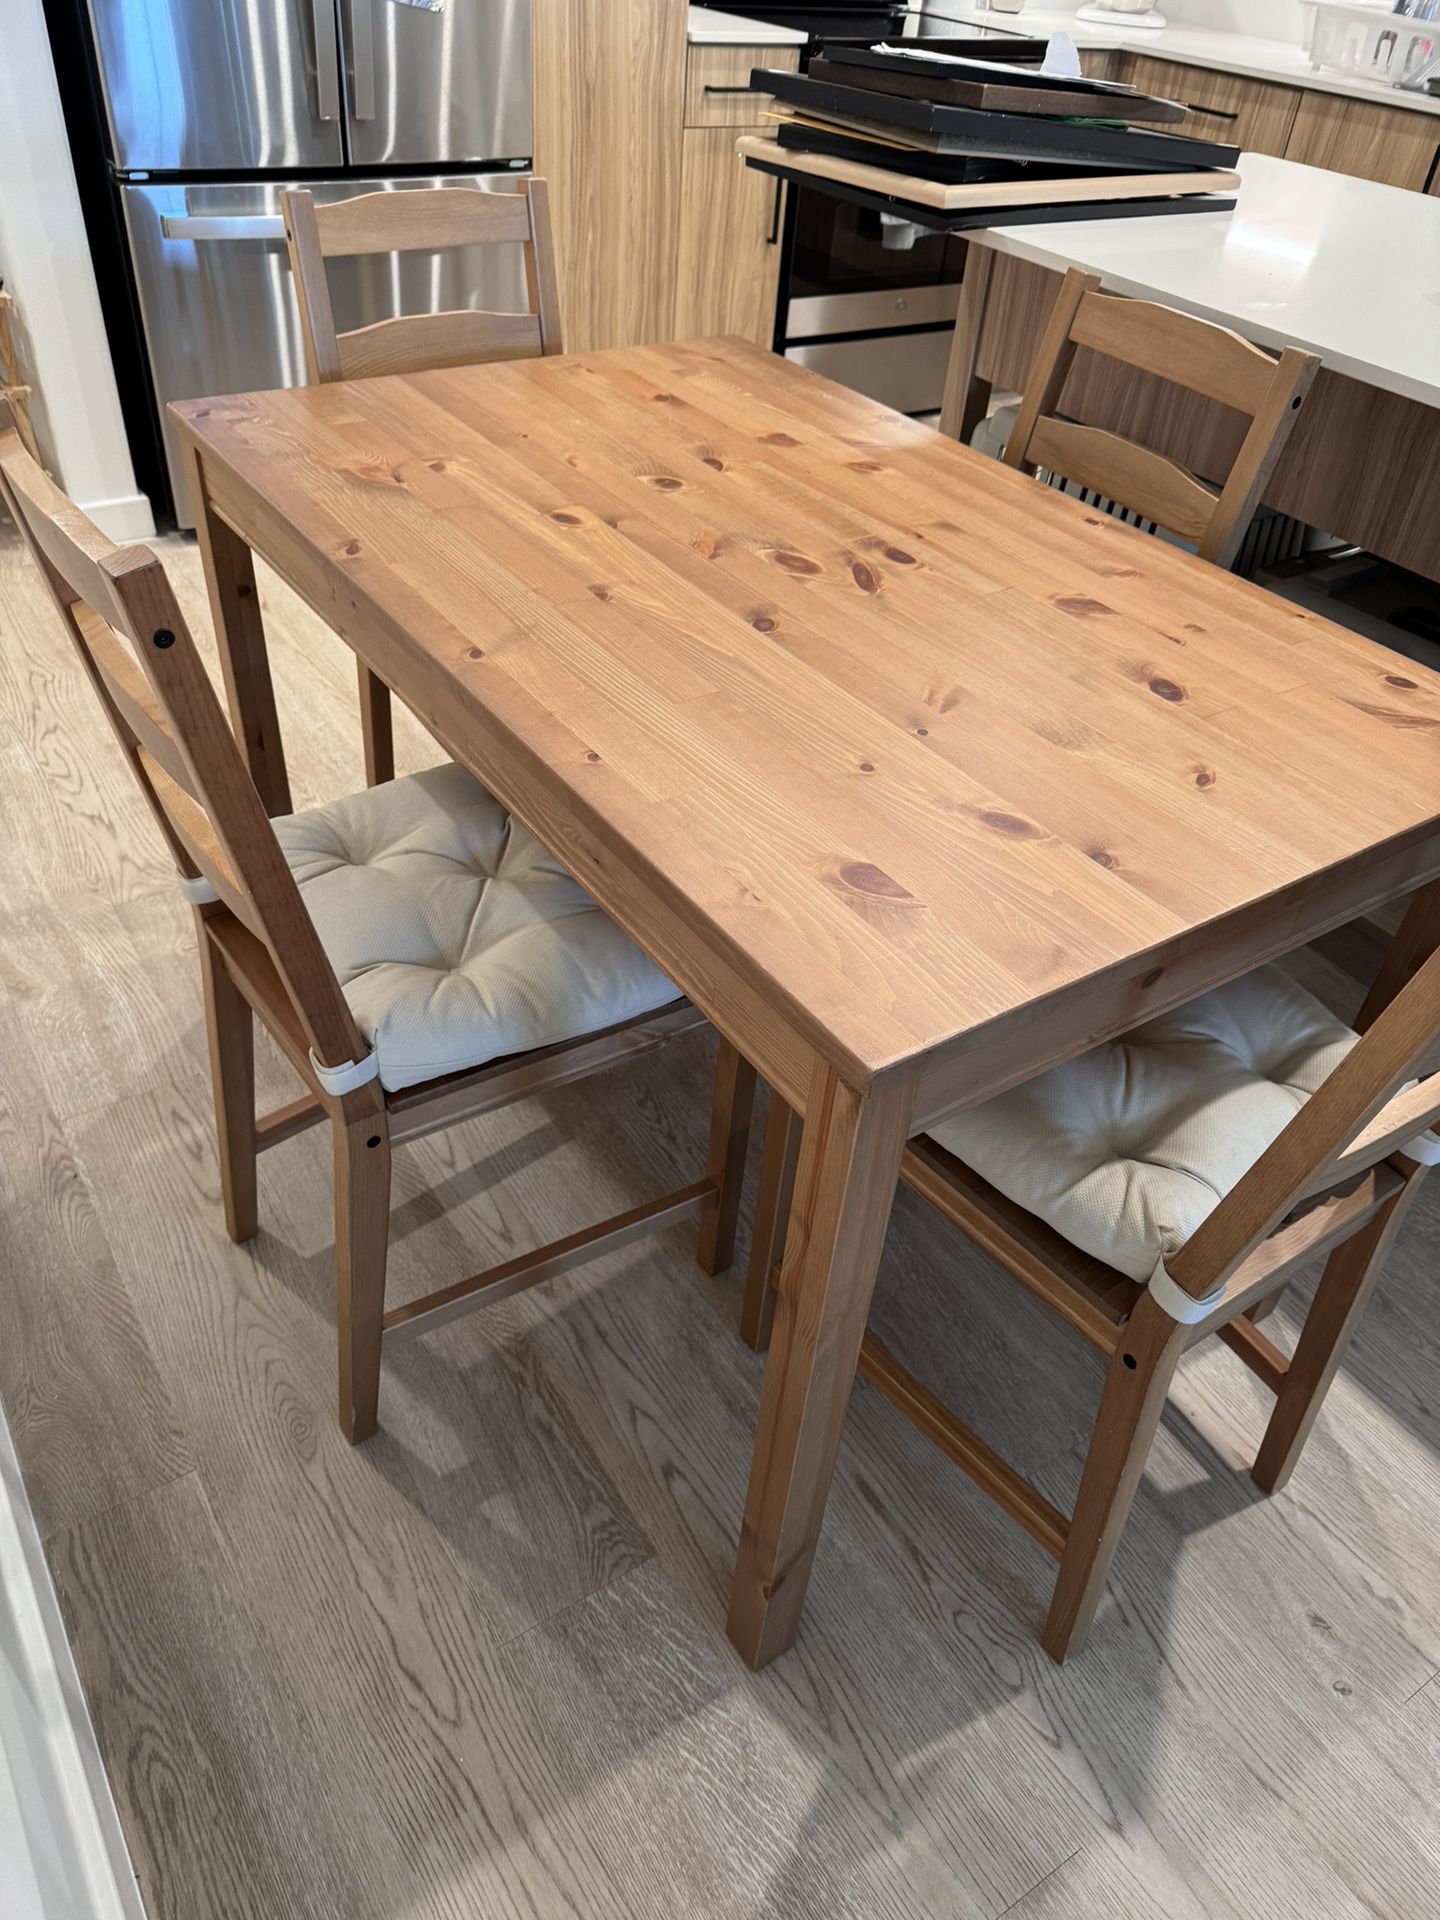 IKEA Barely Used Kitchen Table Set